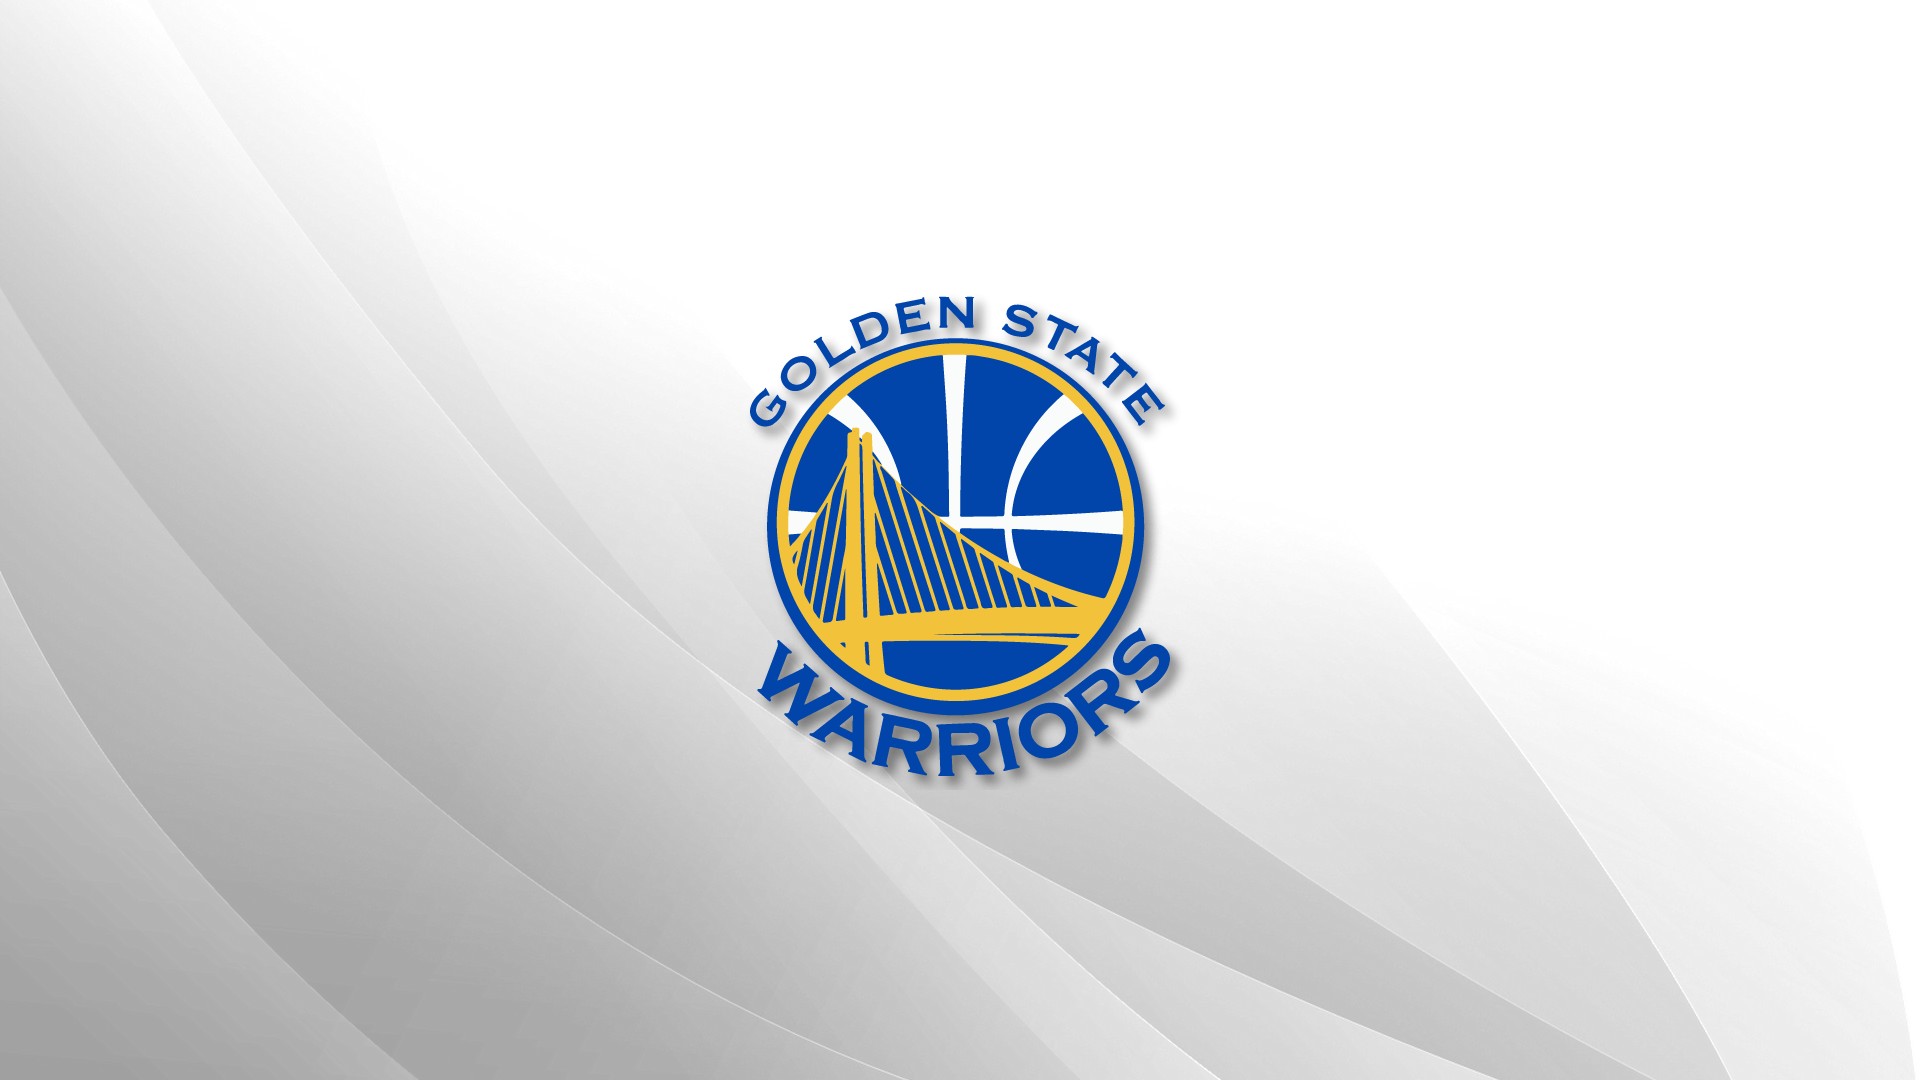 Golden State Warriors NBA Desktop Wallpapers with image dimensions 1920x1080 pixel. You can make this wallpaper for your Desktop Computer Backgrounds, Windows or Mac Screensavers, iPhone Lock screen, Tablet or Android and another Mobile Phone device